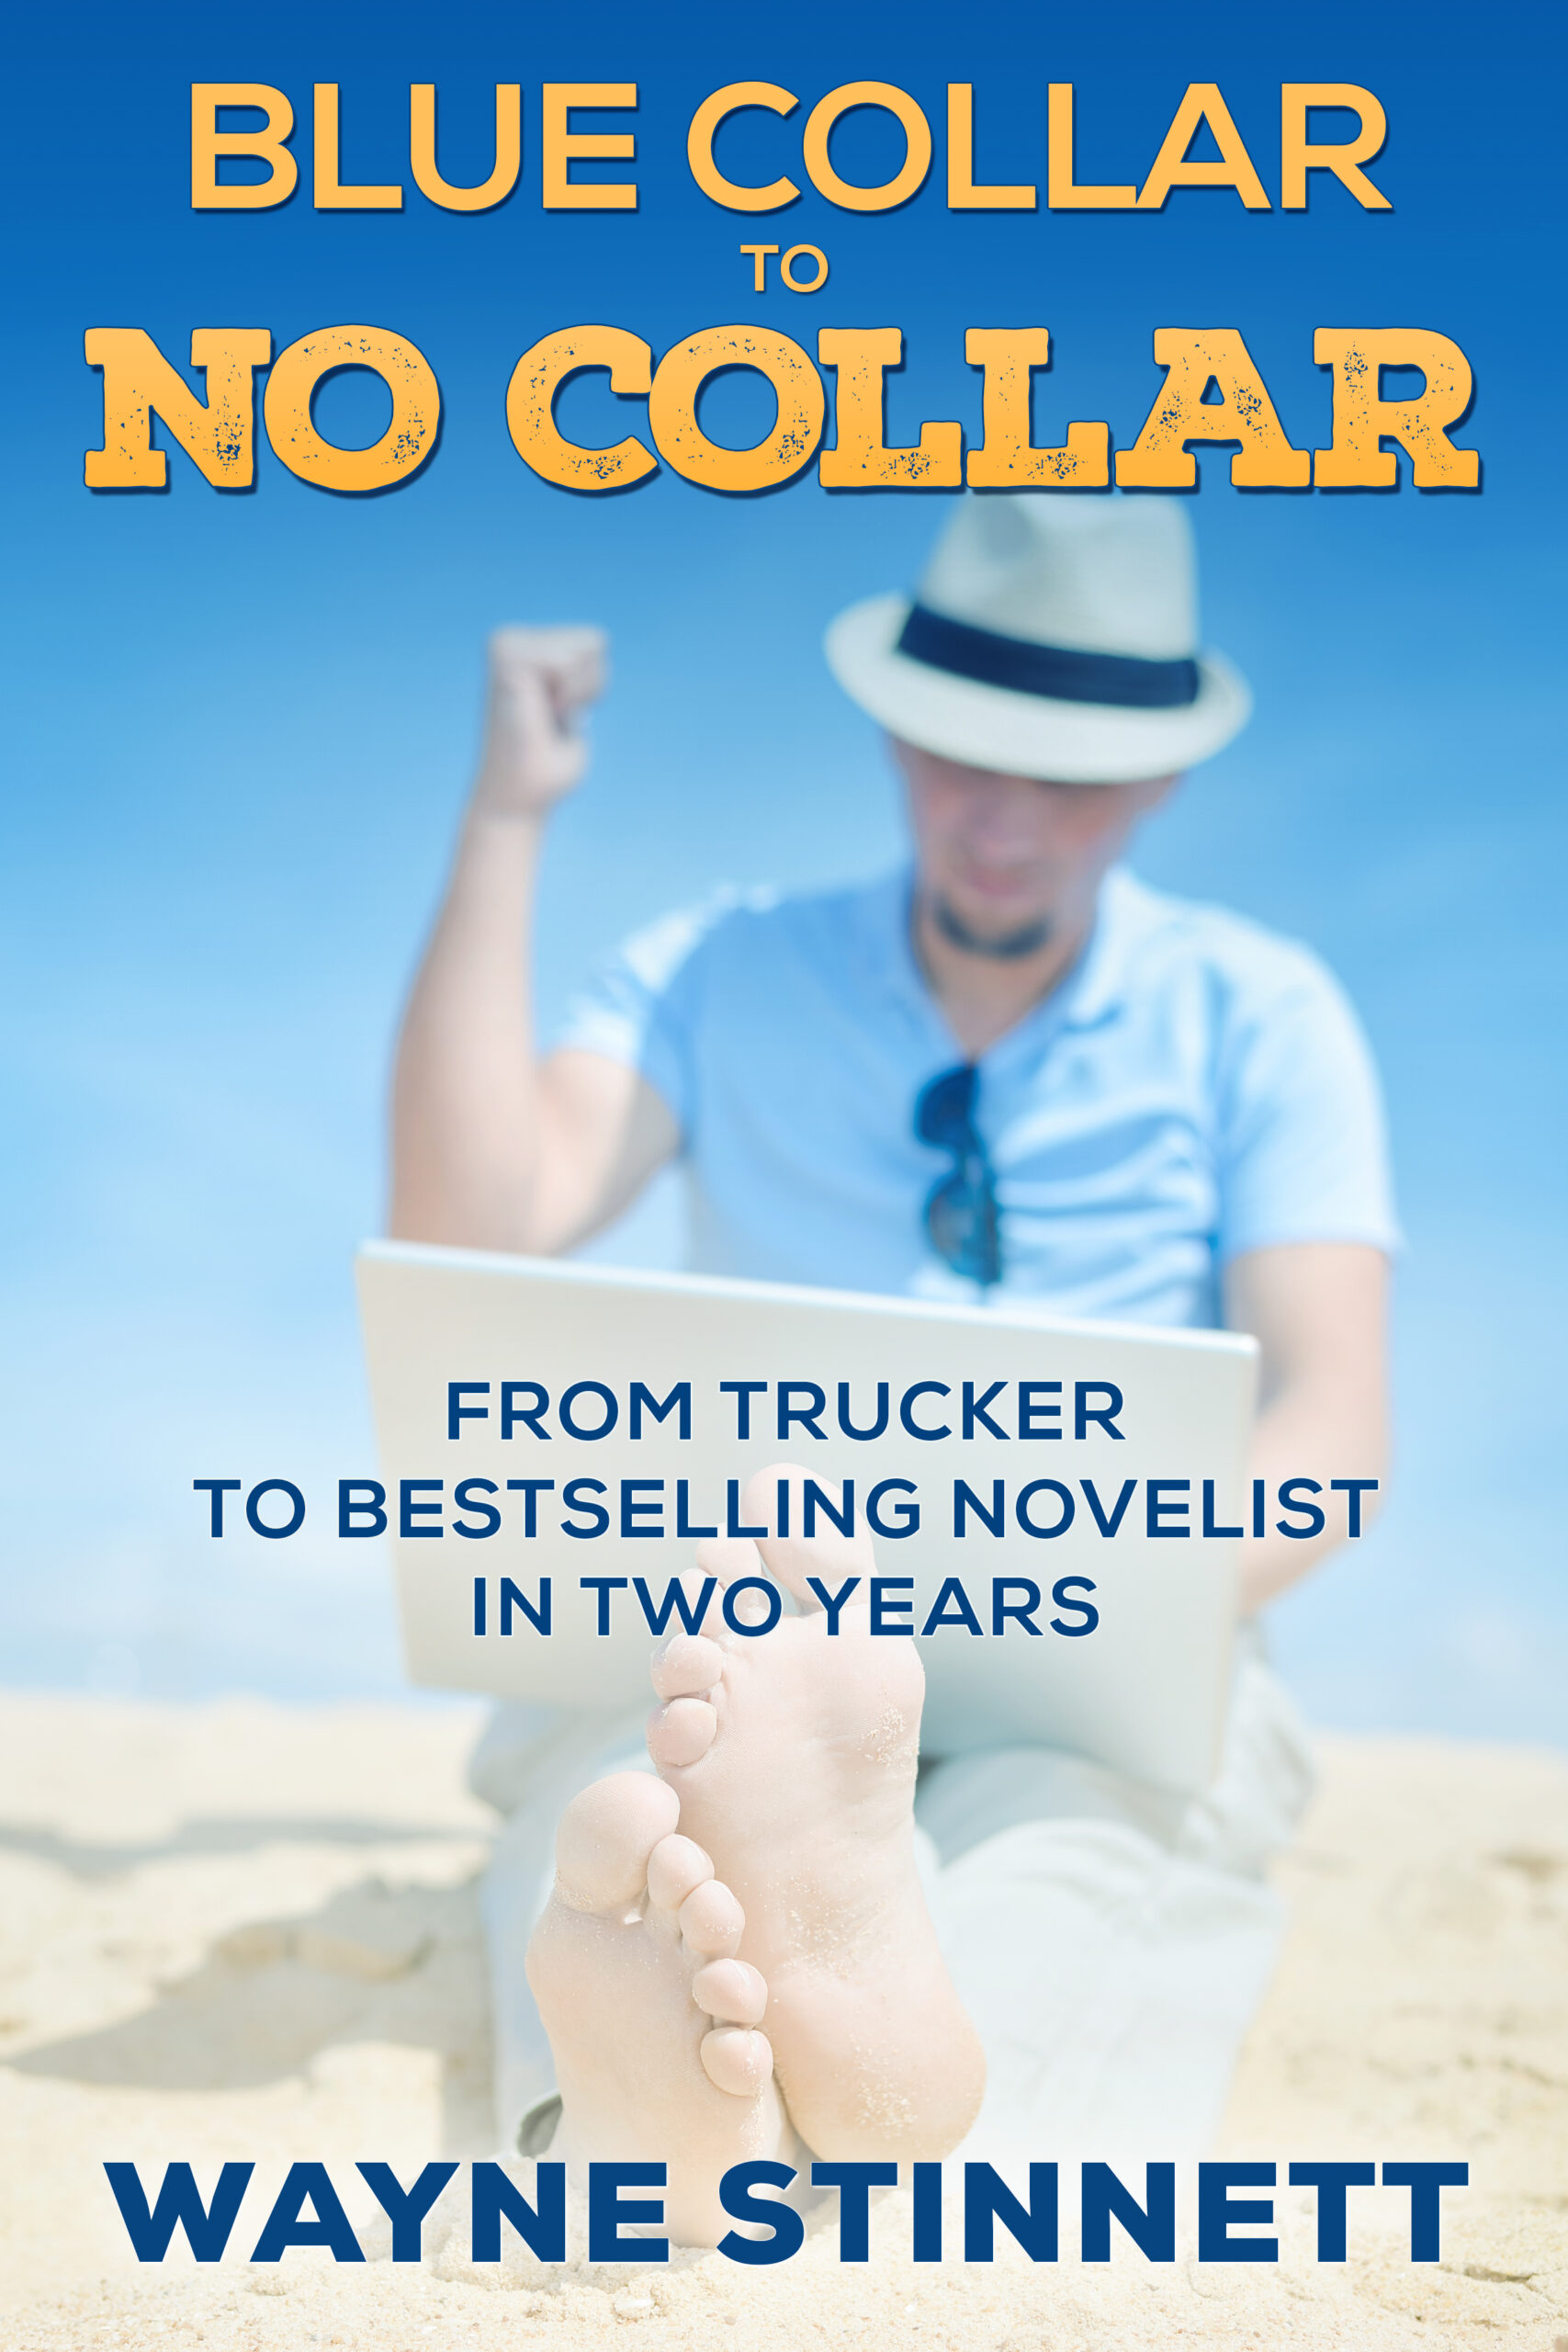 Book Cover of Blue Collar to No Collar by Wayne Stinnett